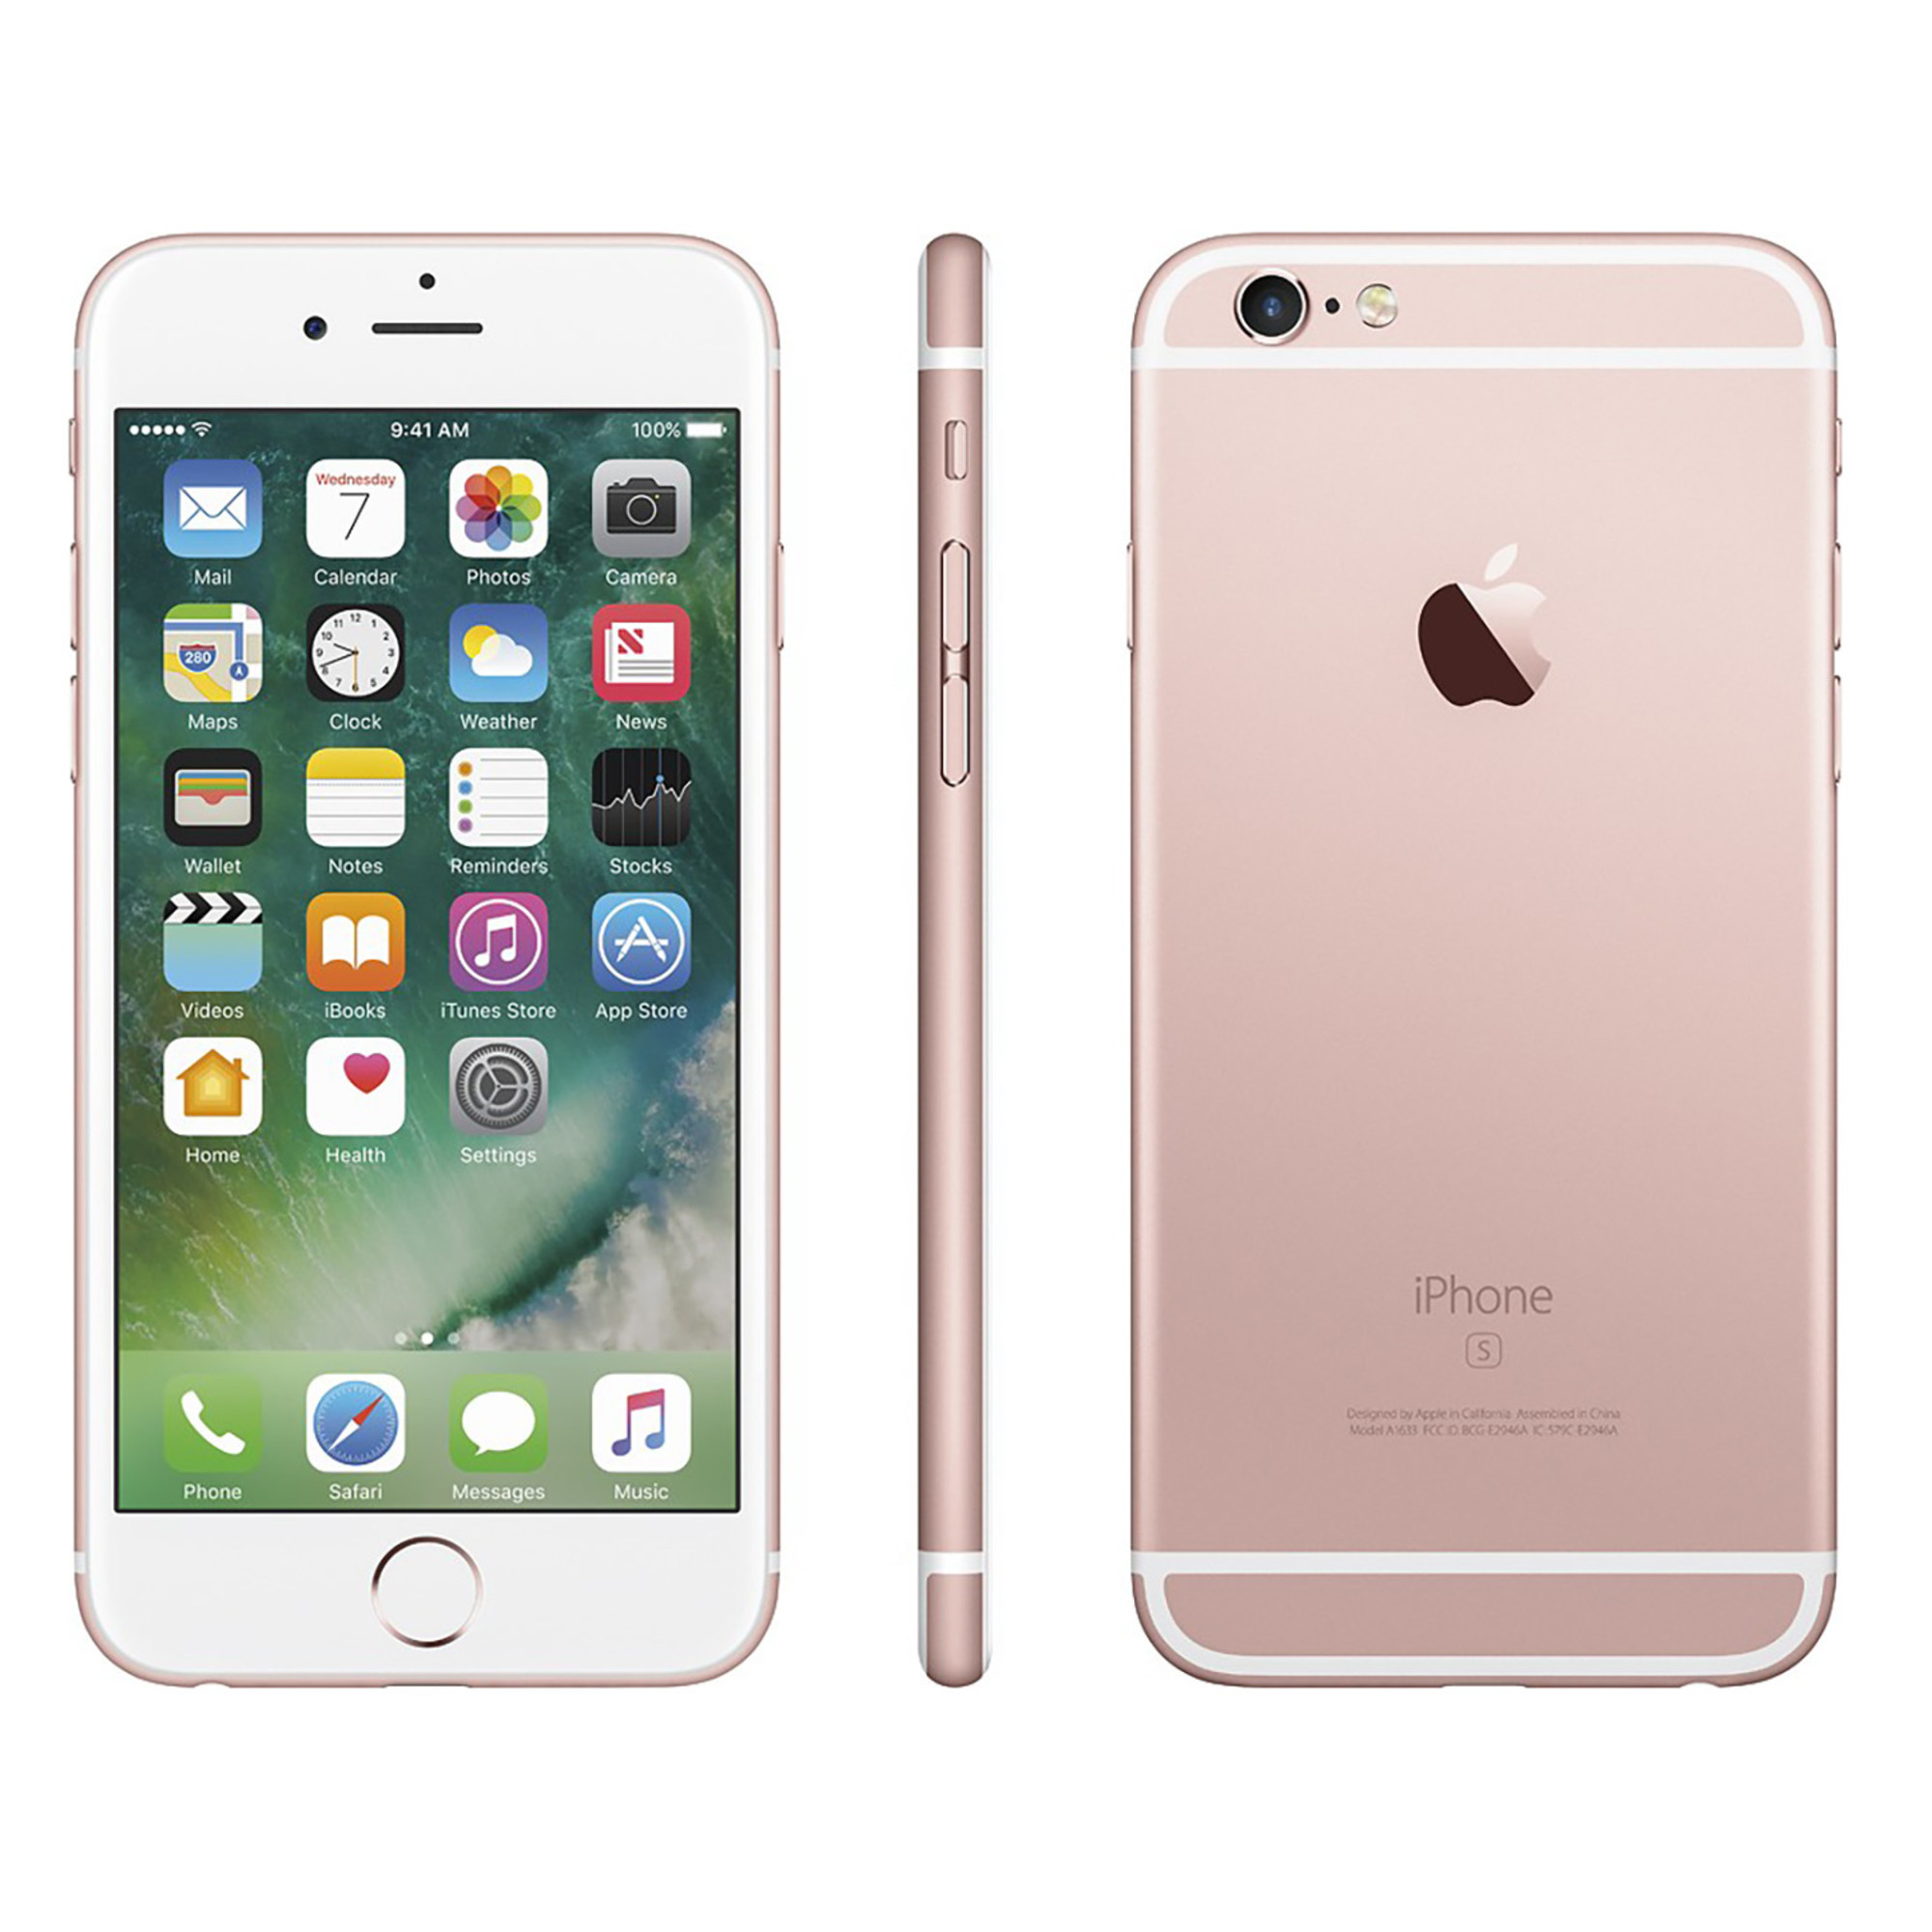 Pre-Owned Apple iPhone 6s 128GB GSM Phone - Rose Gold + WeCare Alcohol Wipes Pack (50 Wipes) (Refurbished: Good) - image 4 of 6